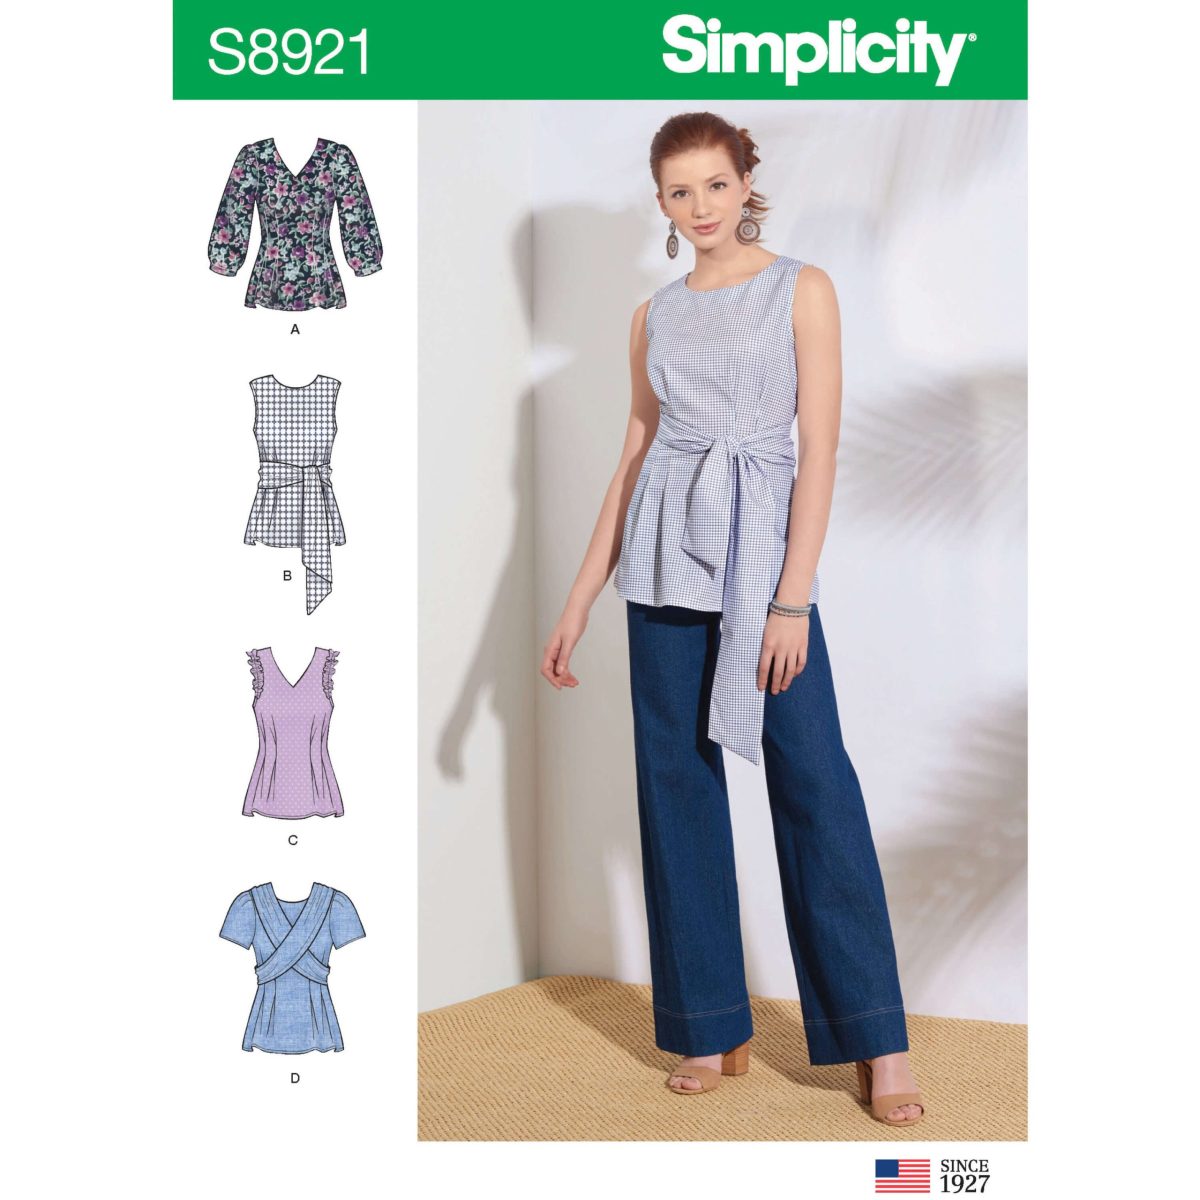 Simplicity Sewing Pattern S8921 Misses' Tops